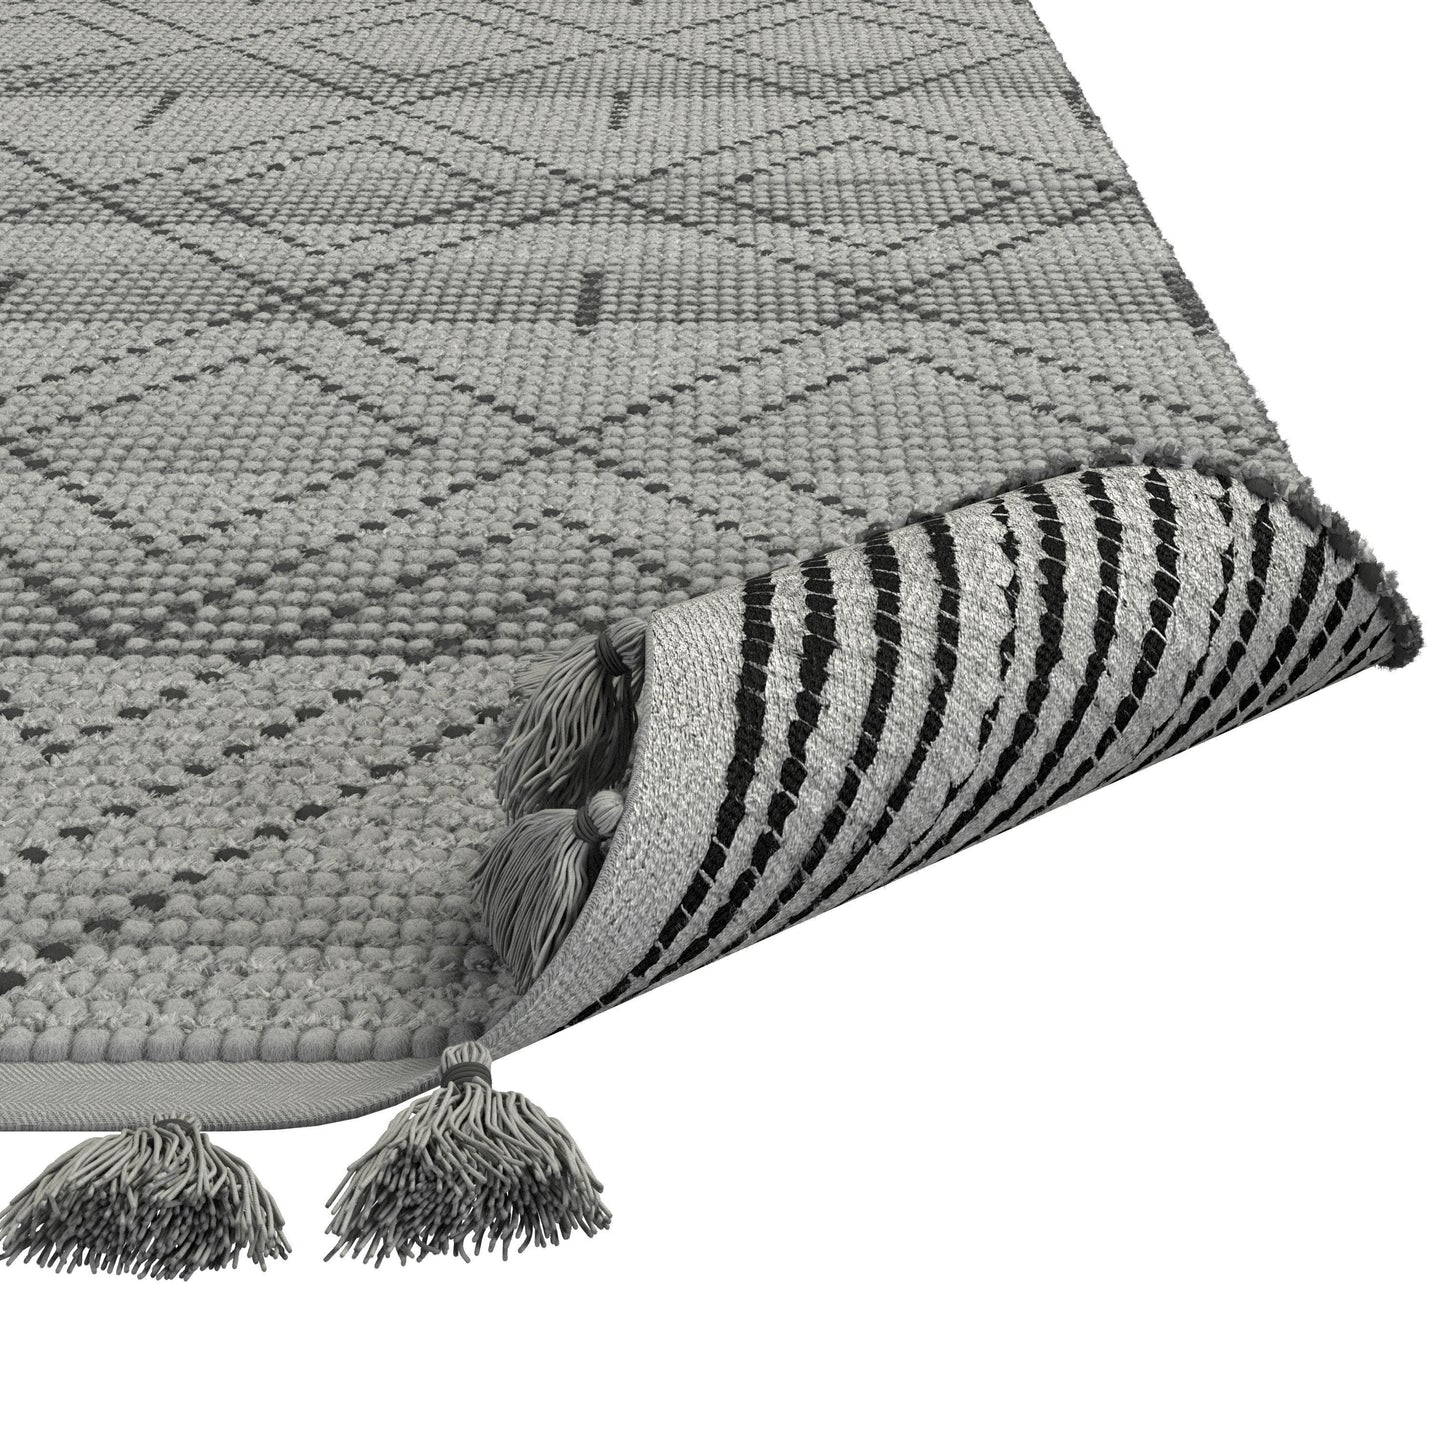 Vail Dowlan Gray and Charcoal - Wool and Cotton Area Rug with Tassels 5x8